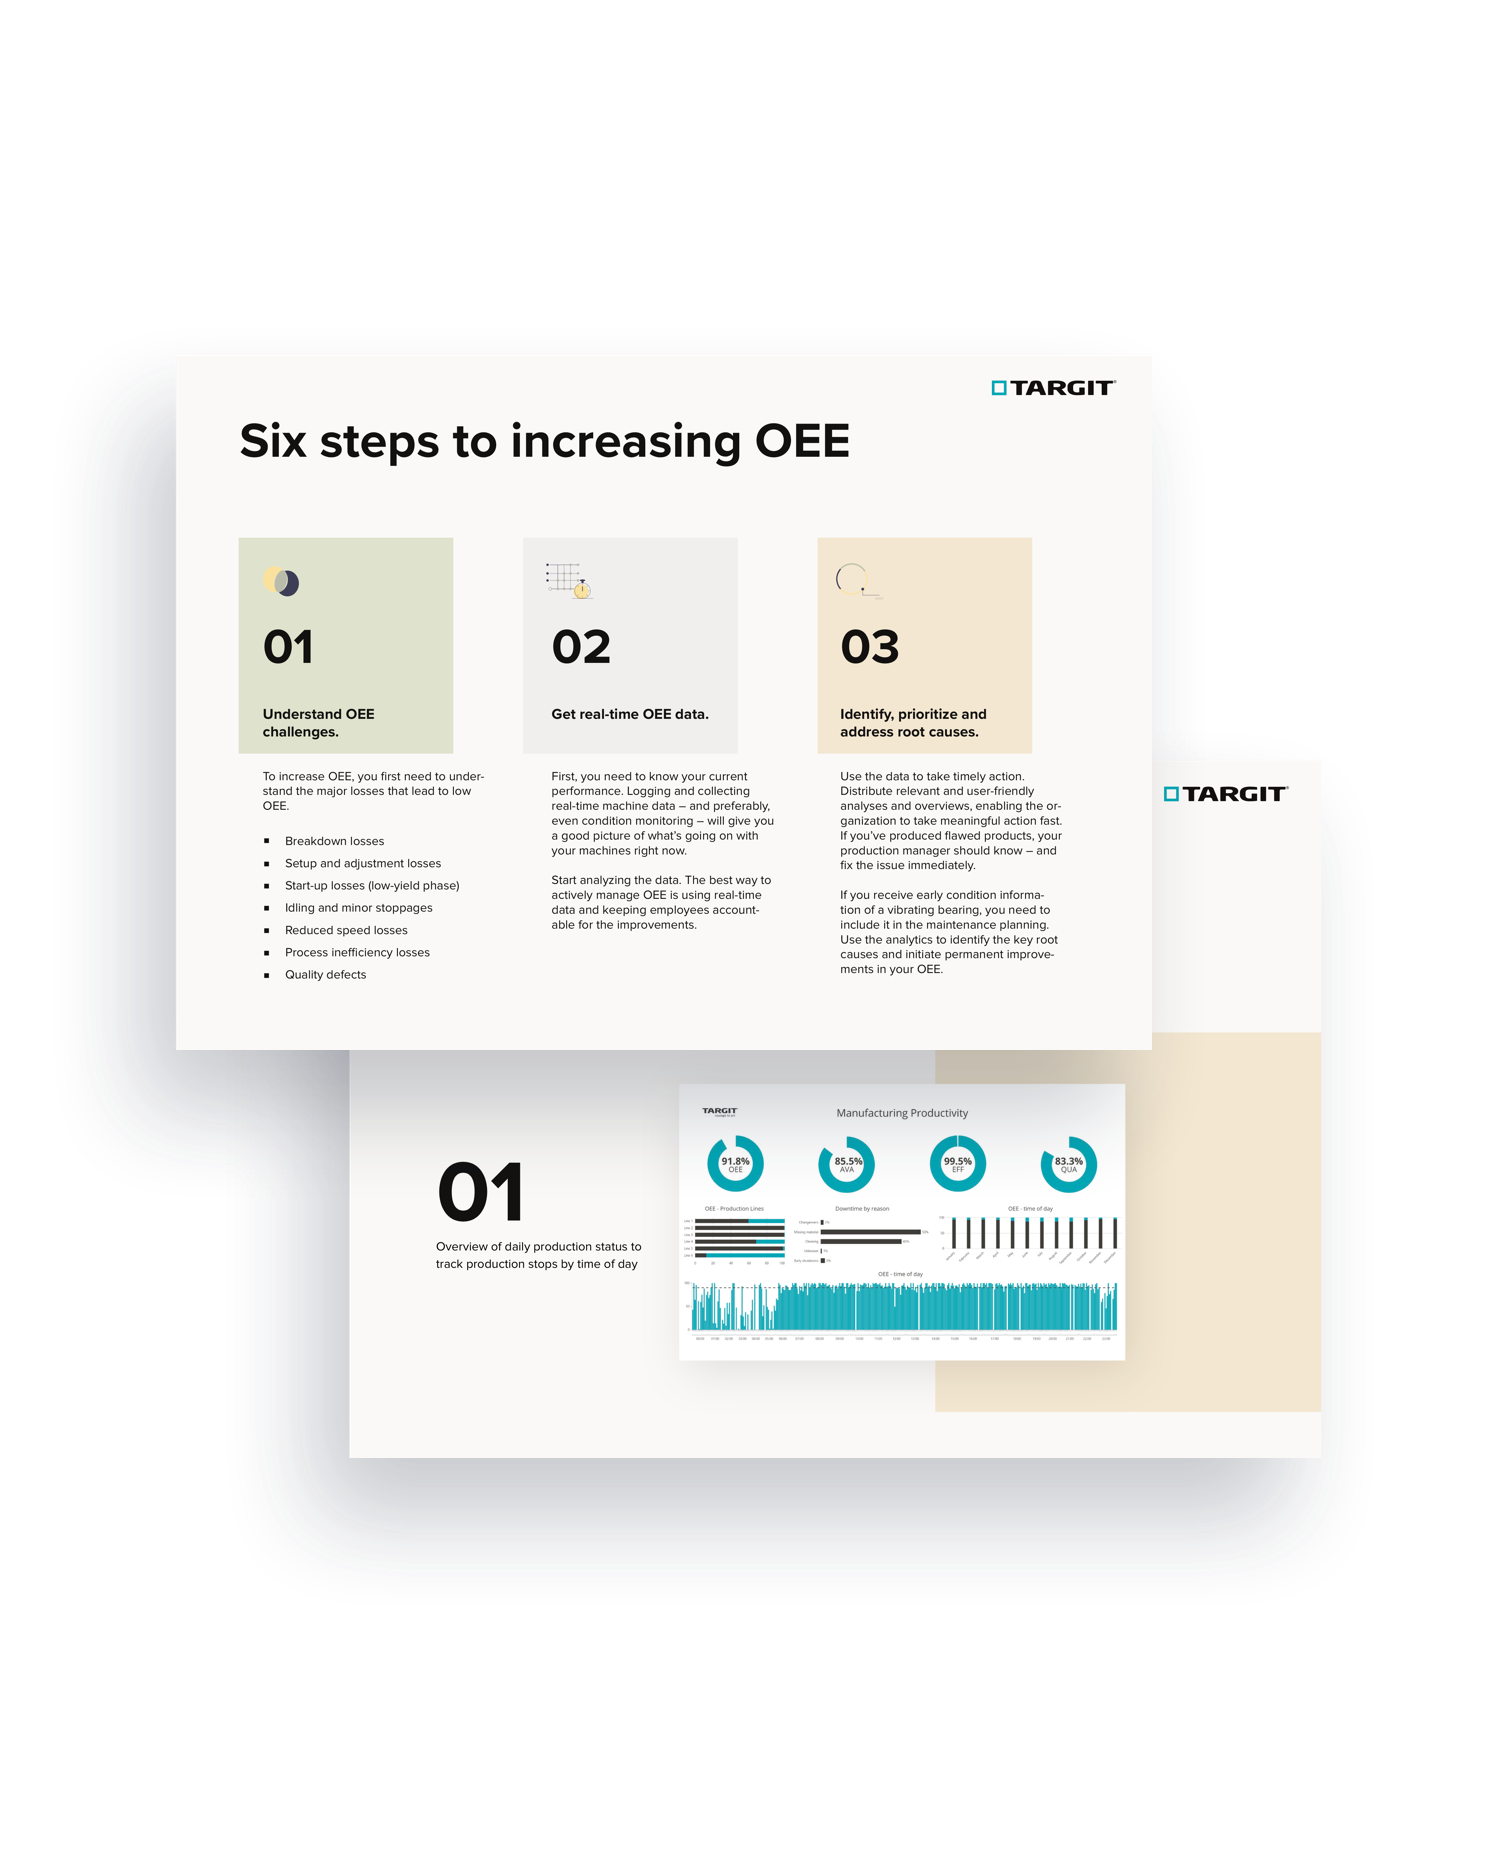 The ultimate guide to world class OEE